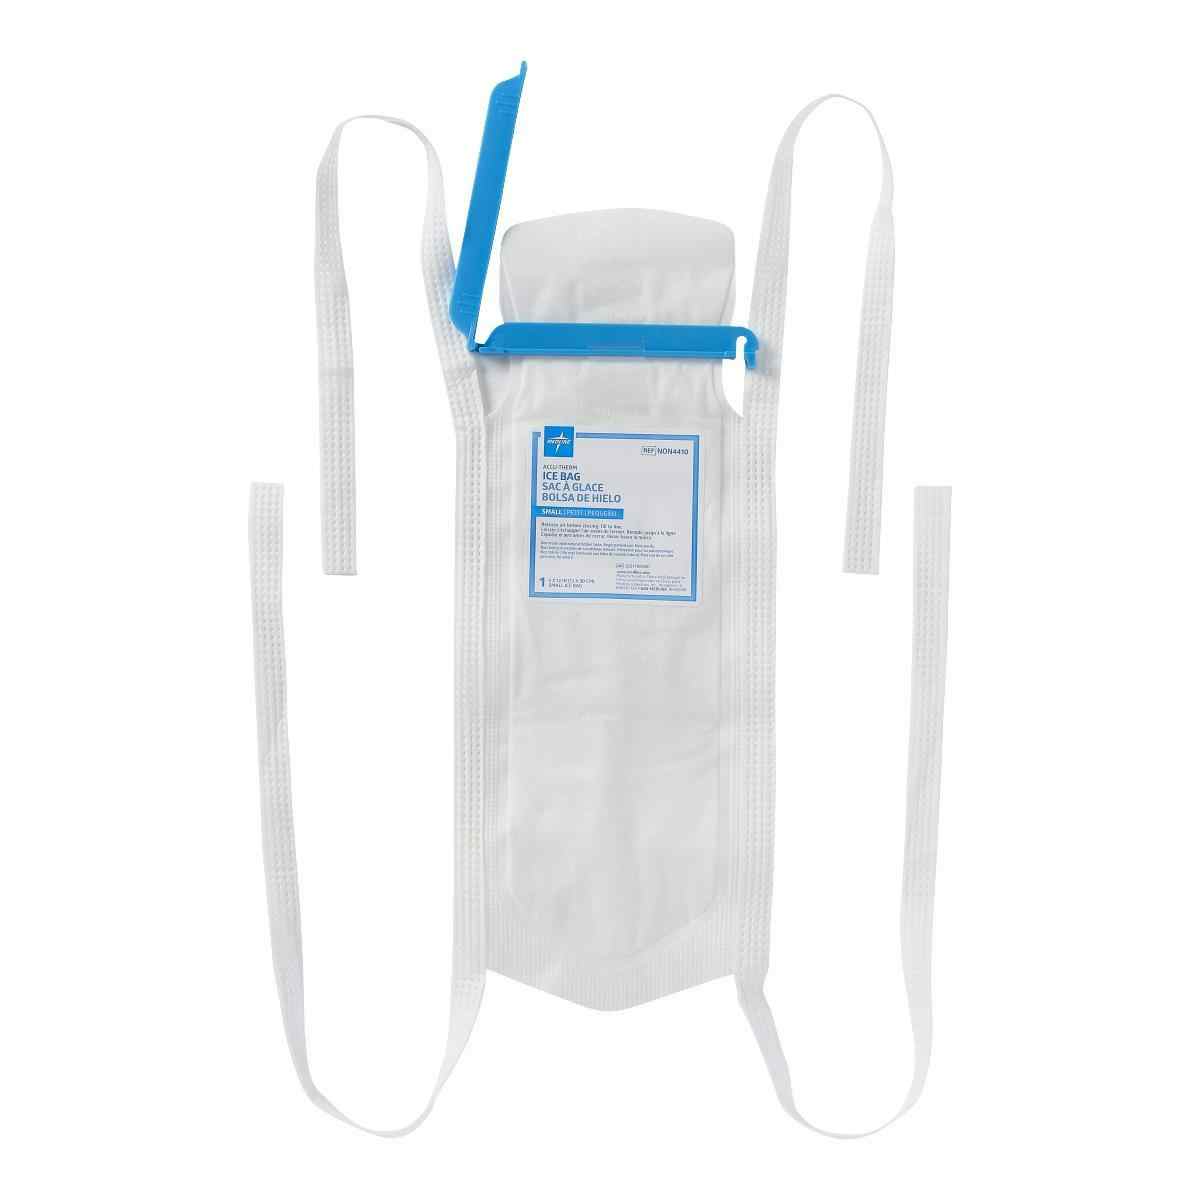 Medline Accu-Therm Refillable Ice Bags, Clamp Closure, NON4410Z, 5" X 12" - Box of 25